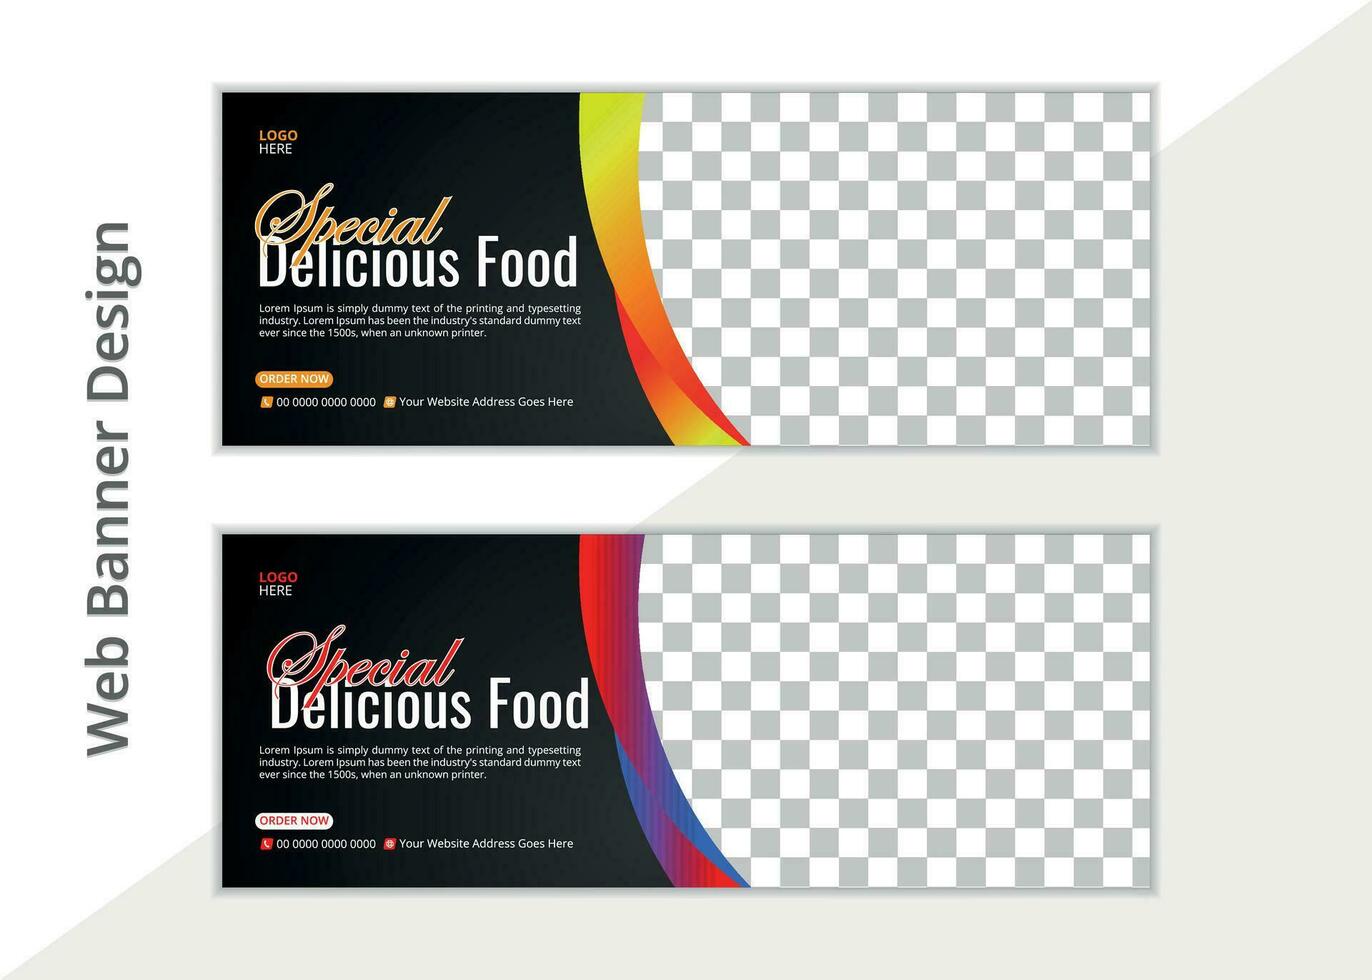 Elegant and simple web banner design layout vector